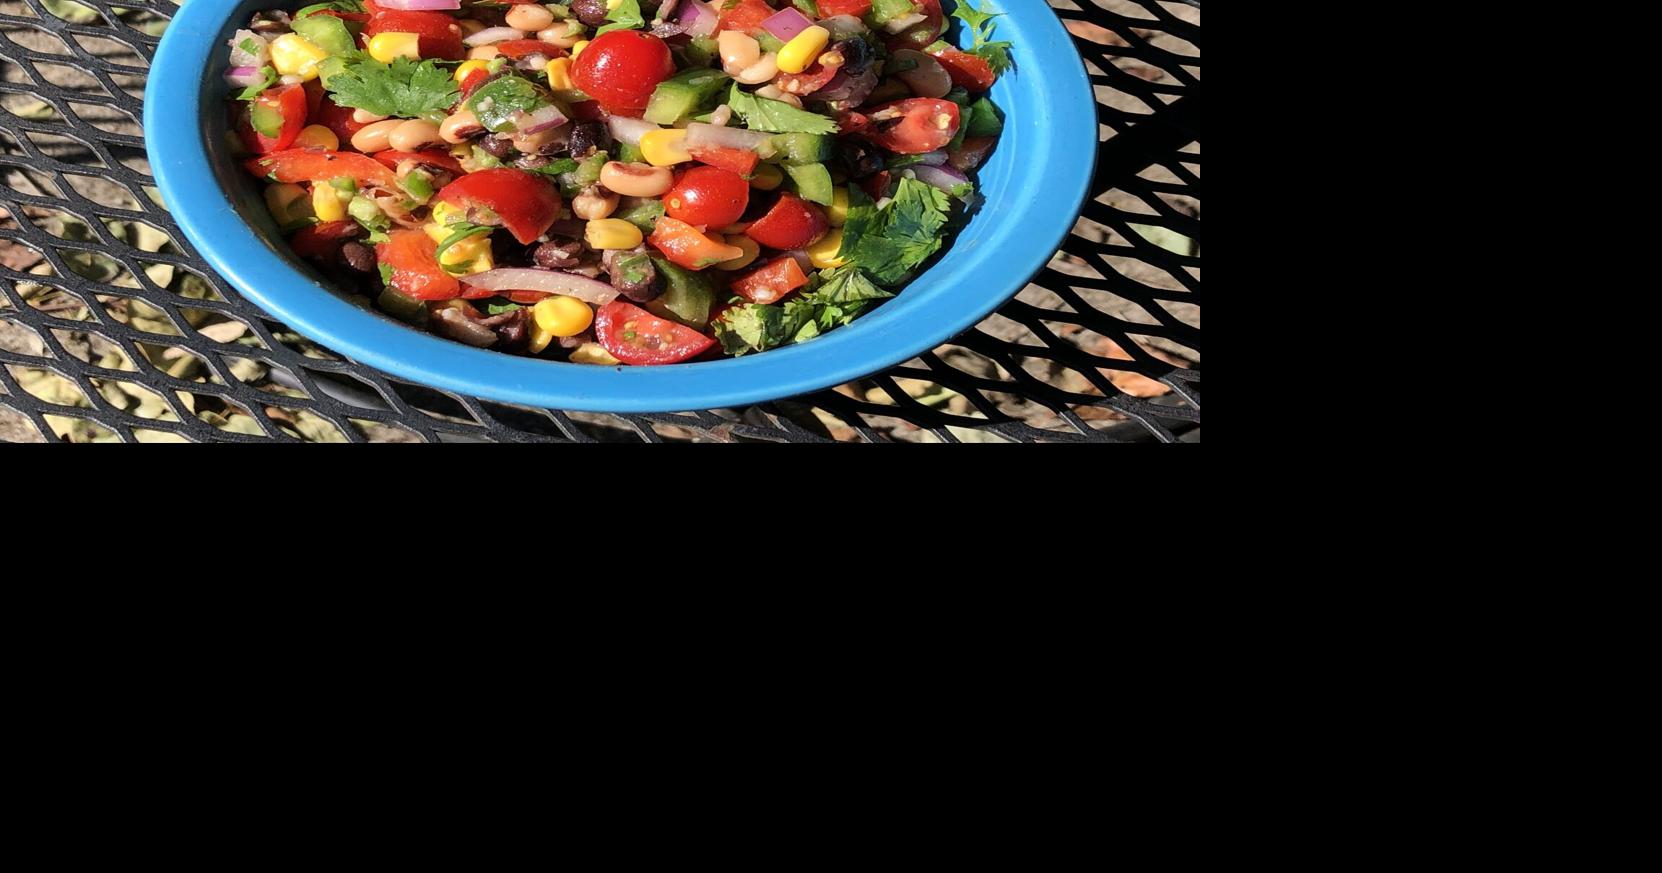 Recipe Swap: Texas caviar a satisfying start to a meal